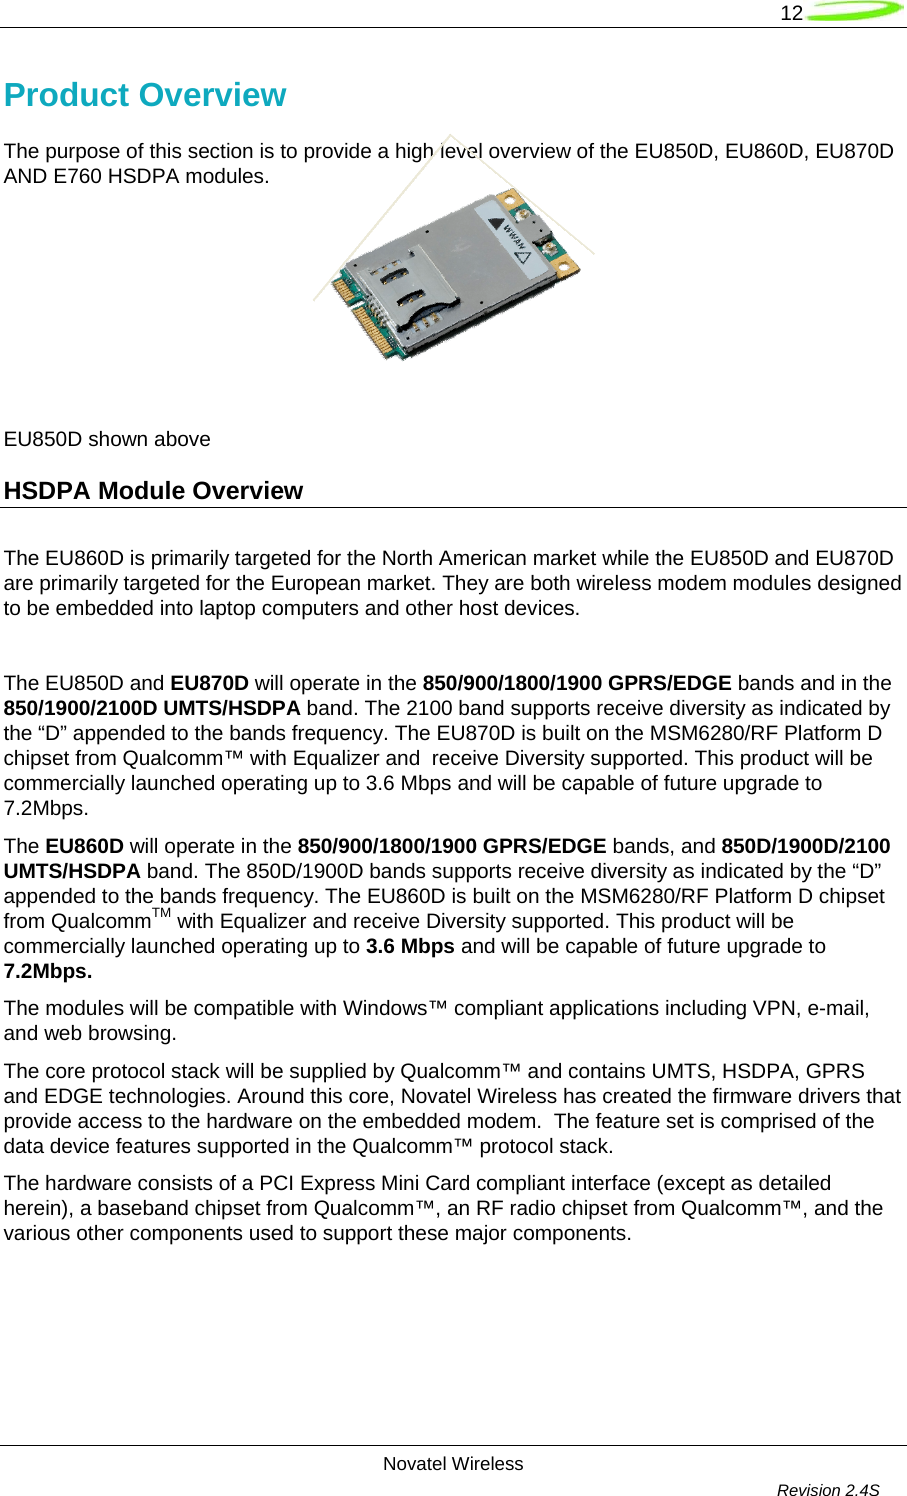   12  Novatel Wireless         Revision 2.4S  Product Overview The purpose of this section is to provide a high level overview of the EU850D, EU860D, EU870D AND E760 HSDPA modules.            EU850D shown above                       HSDPA Module Overview     The EU860D is primarily targeted for the North American market while the EU850D and EU870D are primarily targeted for the European market. They are both wireless modem modules designed to be embedded into laptop computers and other host devices.  The EU850D and EU870D will operate in the 850/900/1800/1900 GPRS/EDGE bands and in the 850/1900/2100D UMTS/HSDPA band. The 2100 band supports receive diversity as indicated by the “D” appended to the bands frequency. The EU870D is built on the MSM6280/RF Platform D chipset from Qualcomm™ with Equalizer and  receive Diversity supported. This product will be commercially launched operating up to 3.6 Mbps and will be capable of future upgrade to 7.2Mbps.  The EU860D will operate in the 850/900/1800/1900 GPRS/EDGE bands, and 850D/1900D/2100 UMTS/HSDPA band. The 850D/1900D bands supports receive diversity as indicated by the “D” appended to the bands frequency. The EU860D is built on the MSM6280/RF Platform D chipset from QualcommTM with Equalizer and receive Diversity supported. This product will be commercially launched operating up to 3.6 Mbps and will be capable of future upgrade to 7.2Mbps.  The modules will be compatible with Windows™ compliant applications including VPN, e-mail, and web browsing.  The core protocol stack will be supplied by Qualcomm™ and contains UMTS, HSDPA, GPRS and EDGE technologies. Around this core, Novatel Wireless has created the firmware drivers that provide access to the hardware on the embedded modem.  The feature set is comprised of the data device features supported in the Qualcomm™ protocol stack.  The hardware consists of a PCI Express Mini Card compliant interface (except as detailed herein), a baseband chipset from Qualcomm™, an RF radio chipset from Qualcomm™, and the various other components used to support these major components.     